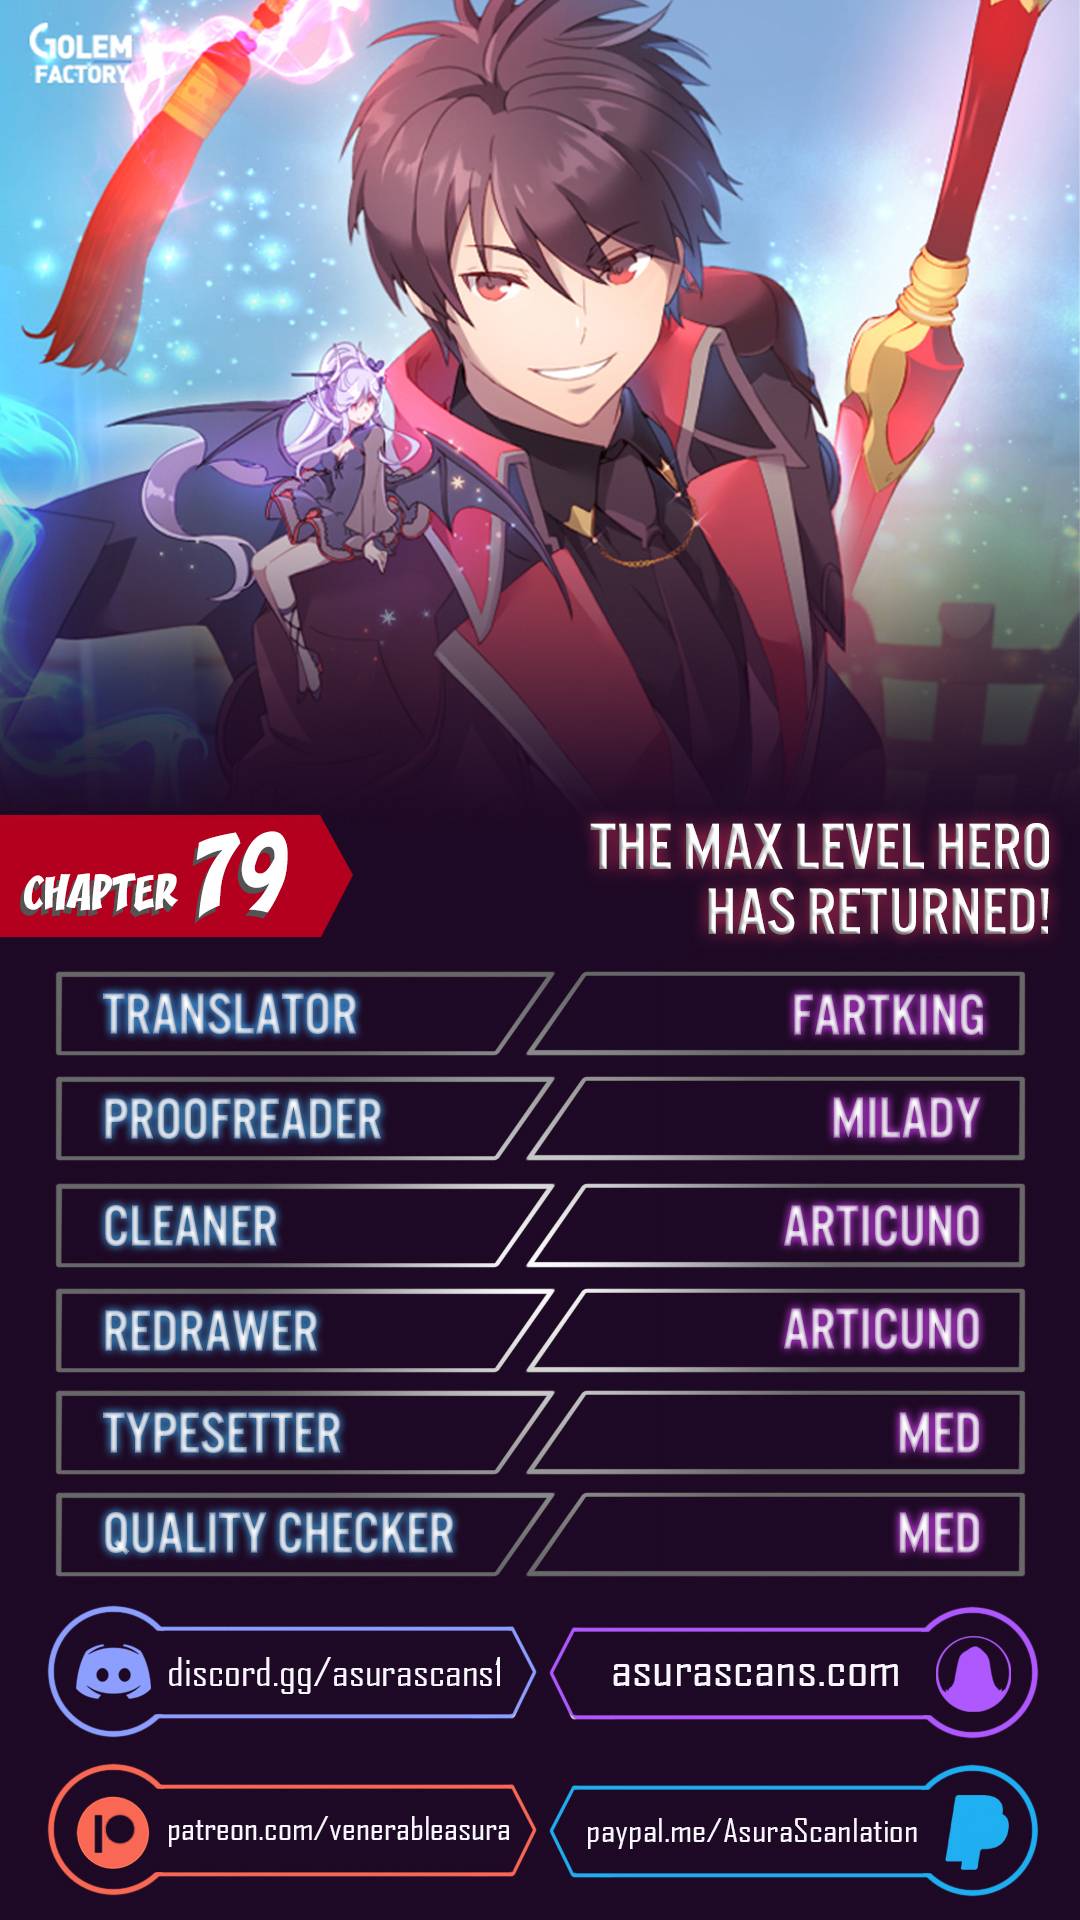 The MAX leveled hero will return! Chapter 79